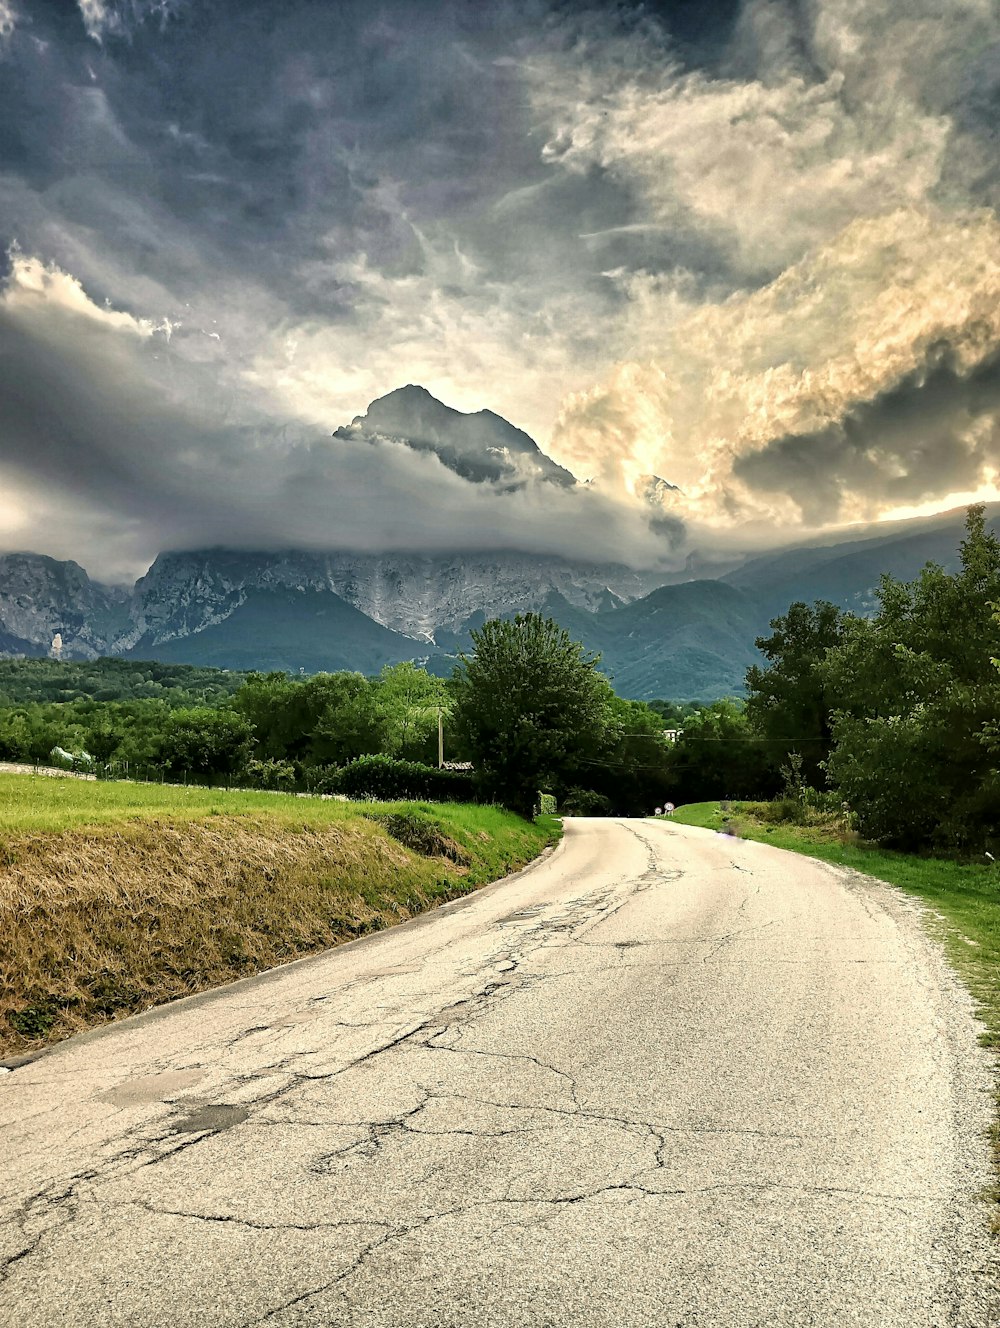 a road with trees and mountains in the background